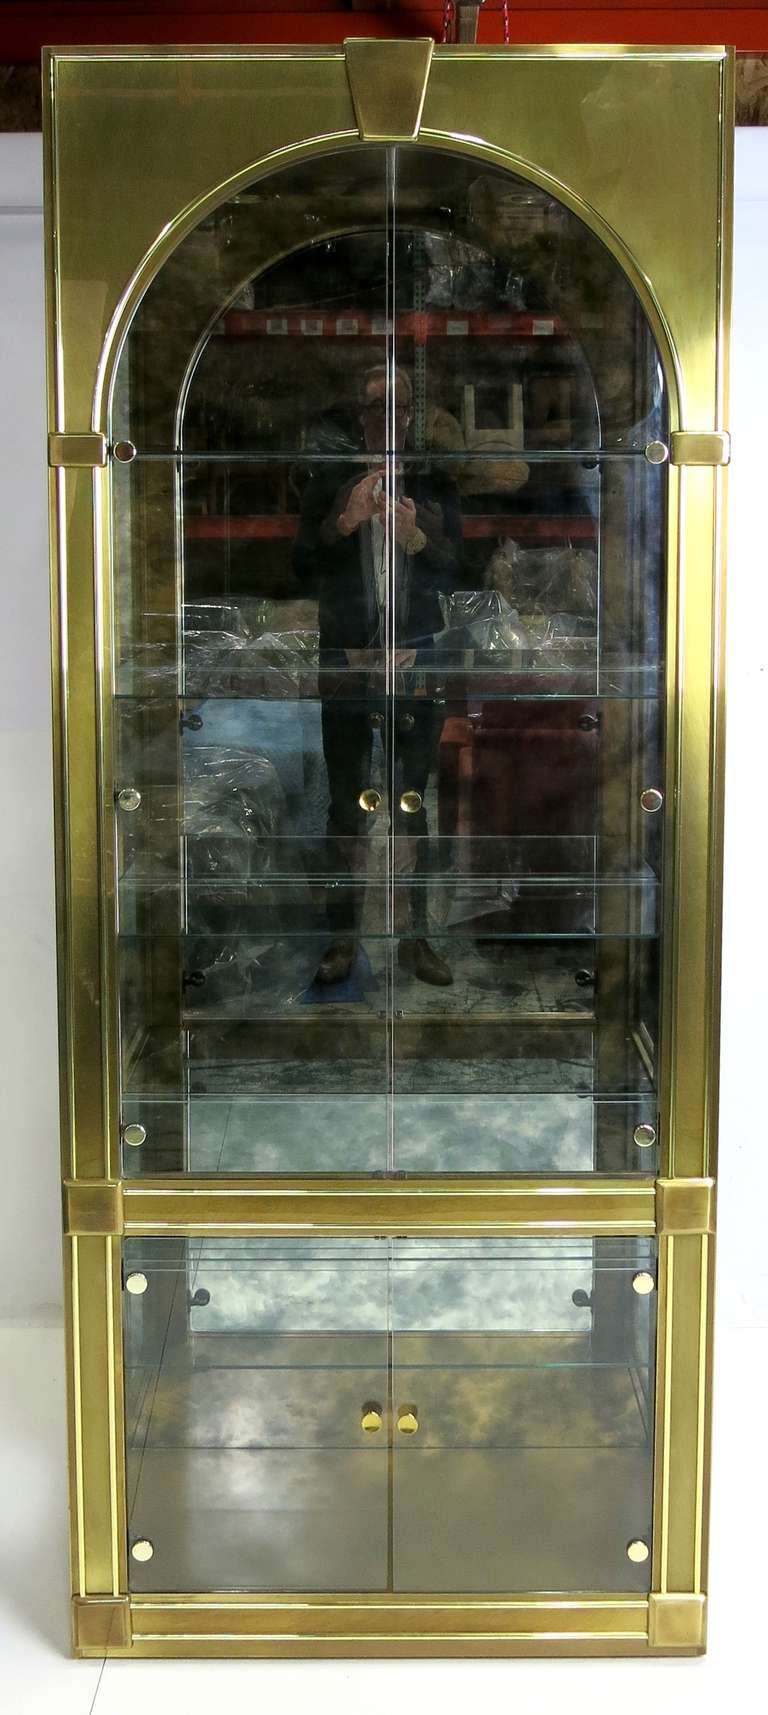 Fantastic Brass Clad Vitrine with Arched doors and Keystone pediment.  The lighted interior has five adjustable glass shelves with etched plate grooves and a dramatic smoked mirror back.  This example is in virtual mint condition with absolutely no